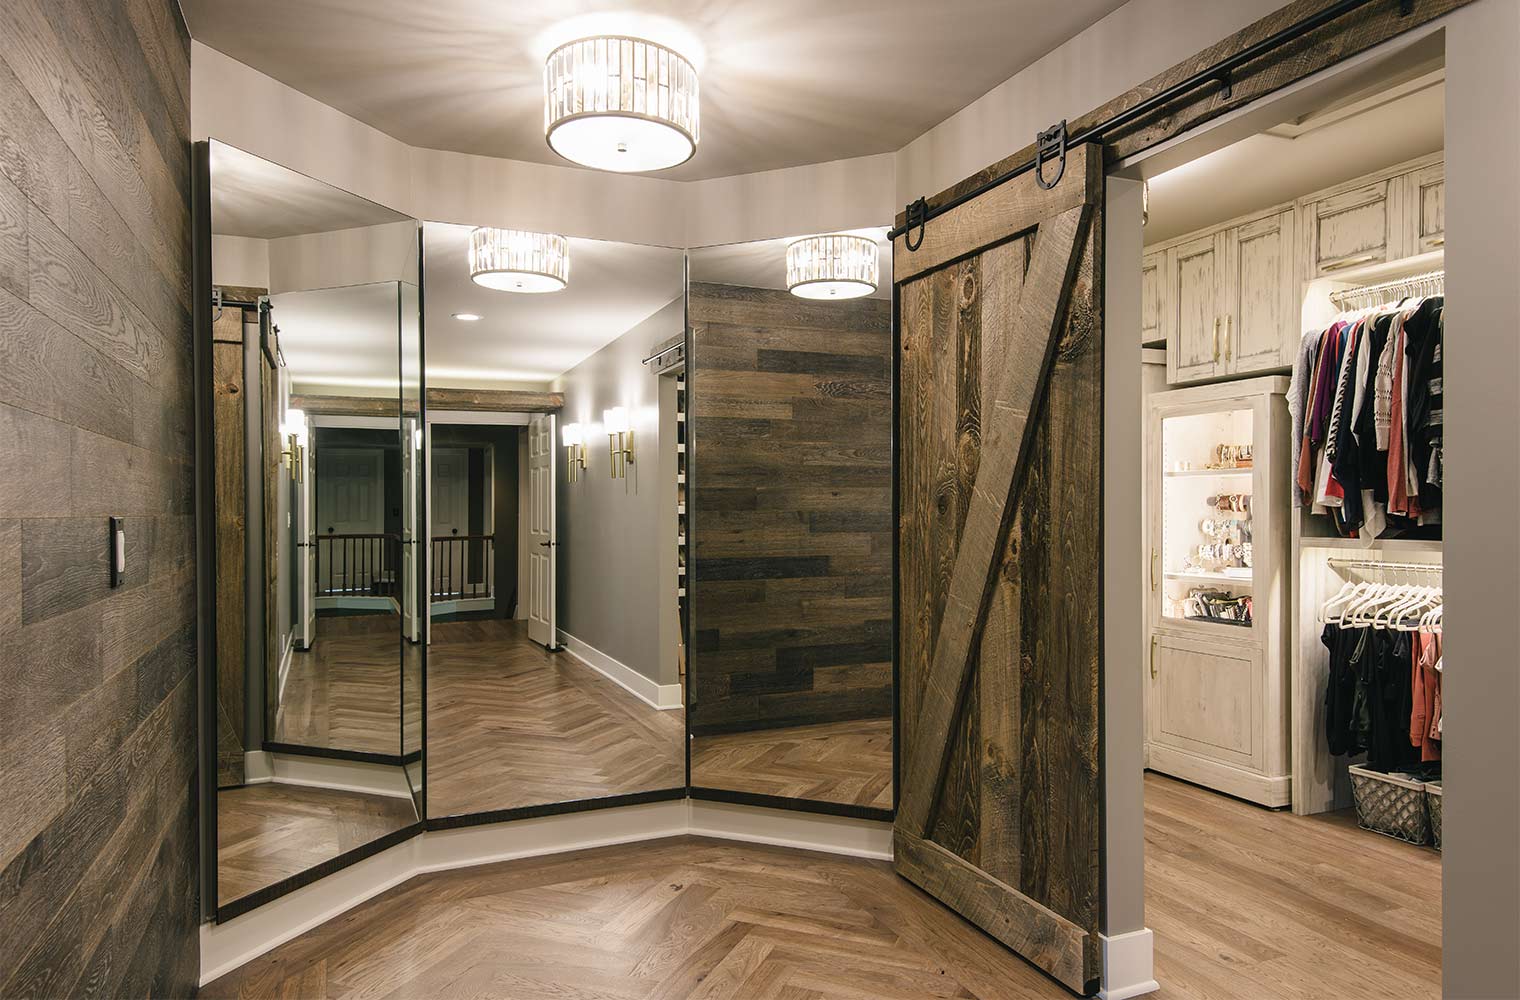 Three-way dressing room style mirror next to lavish walk-in his and her closet in master suite by designer and remodeler Silent Rivers of Des Moines, Iowa